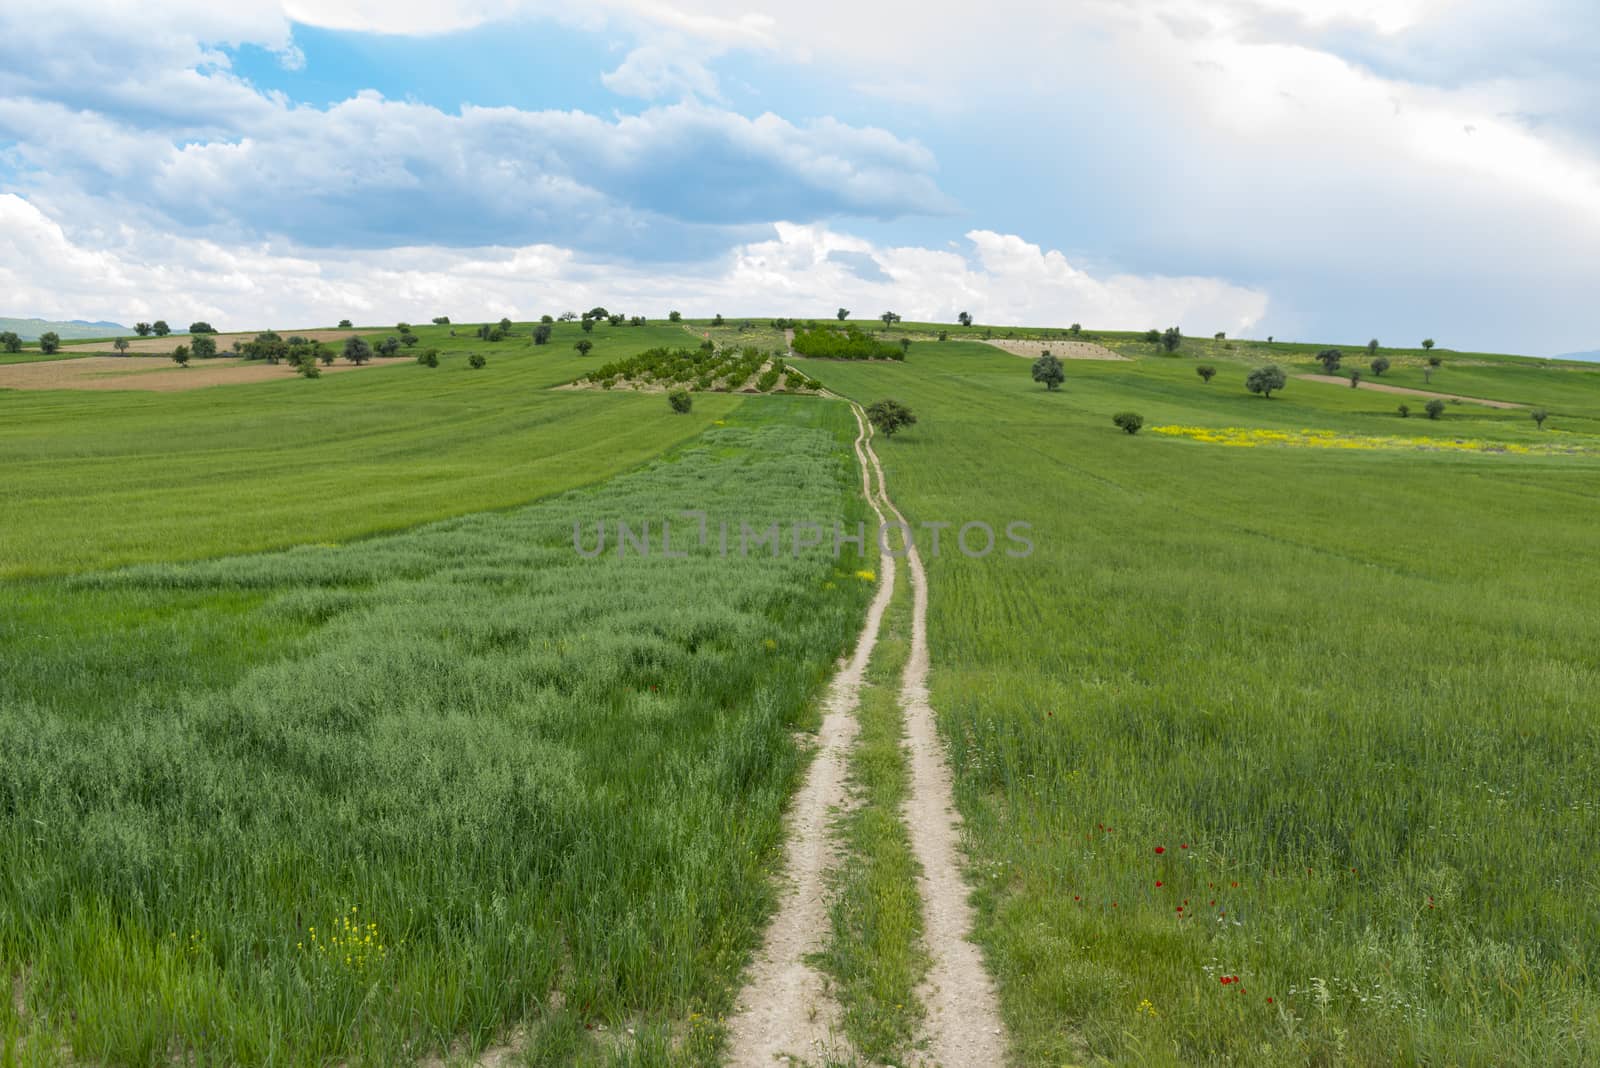 Long fine roads in agricultural land